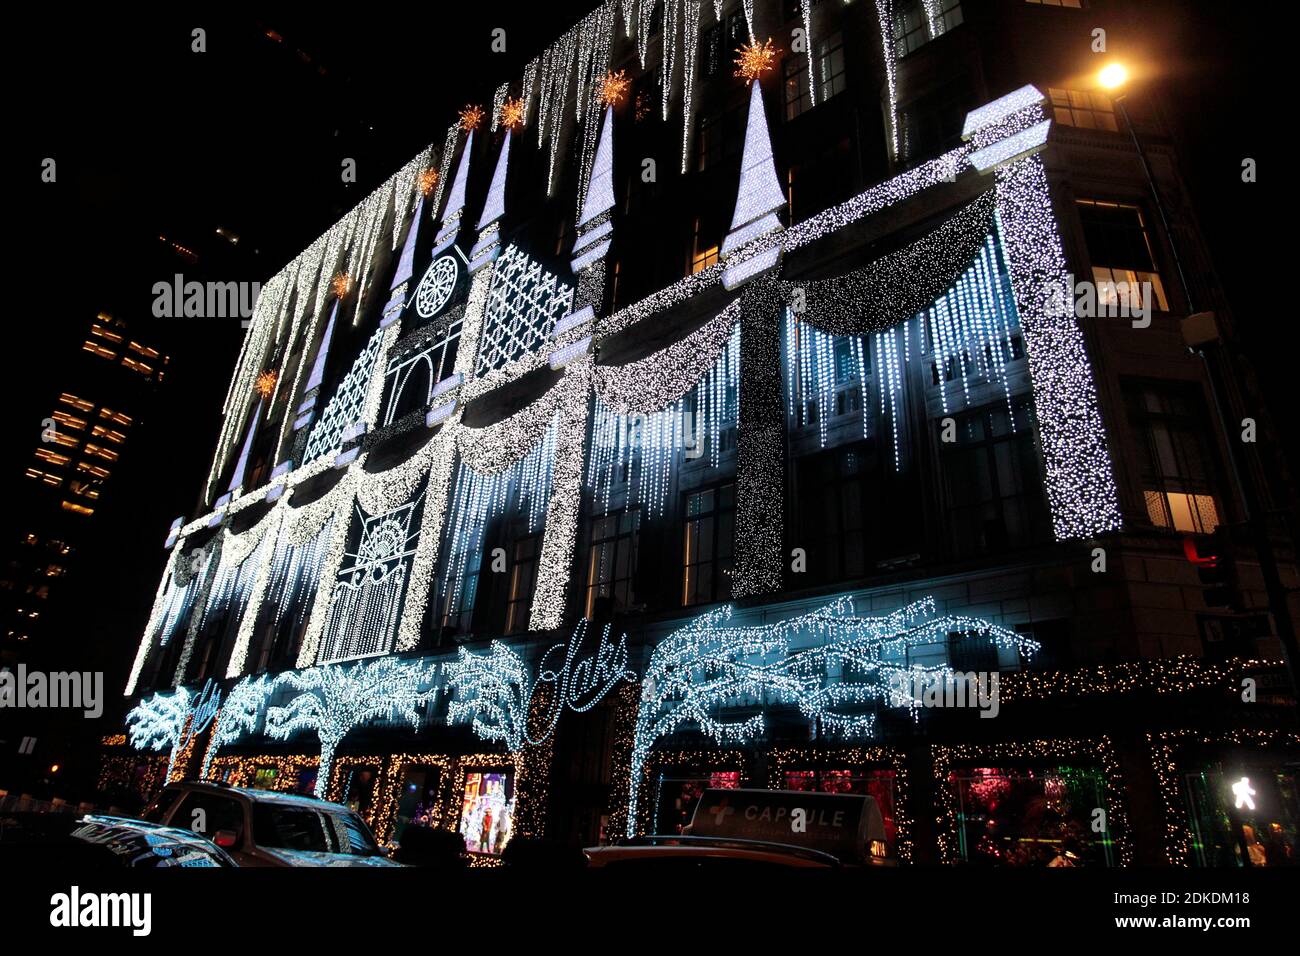 Saks Fifth Avenue Department Store with Christmas Light Show Editorial  Stock Image - Image of building, center: 170568859